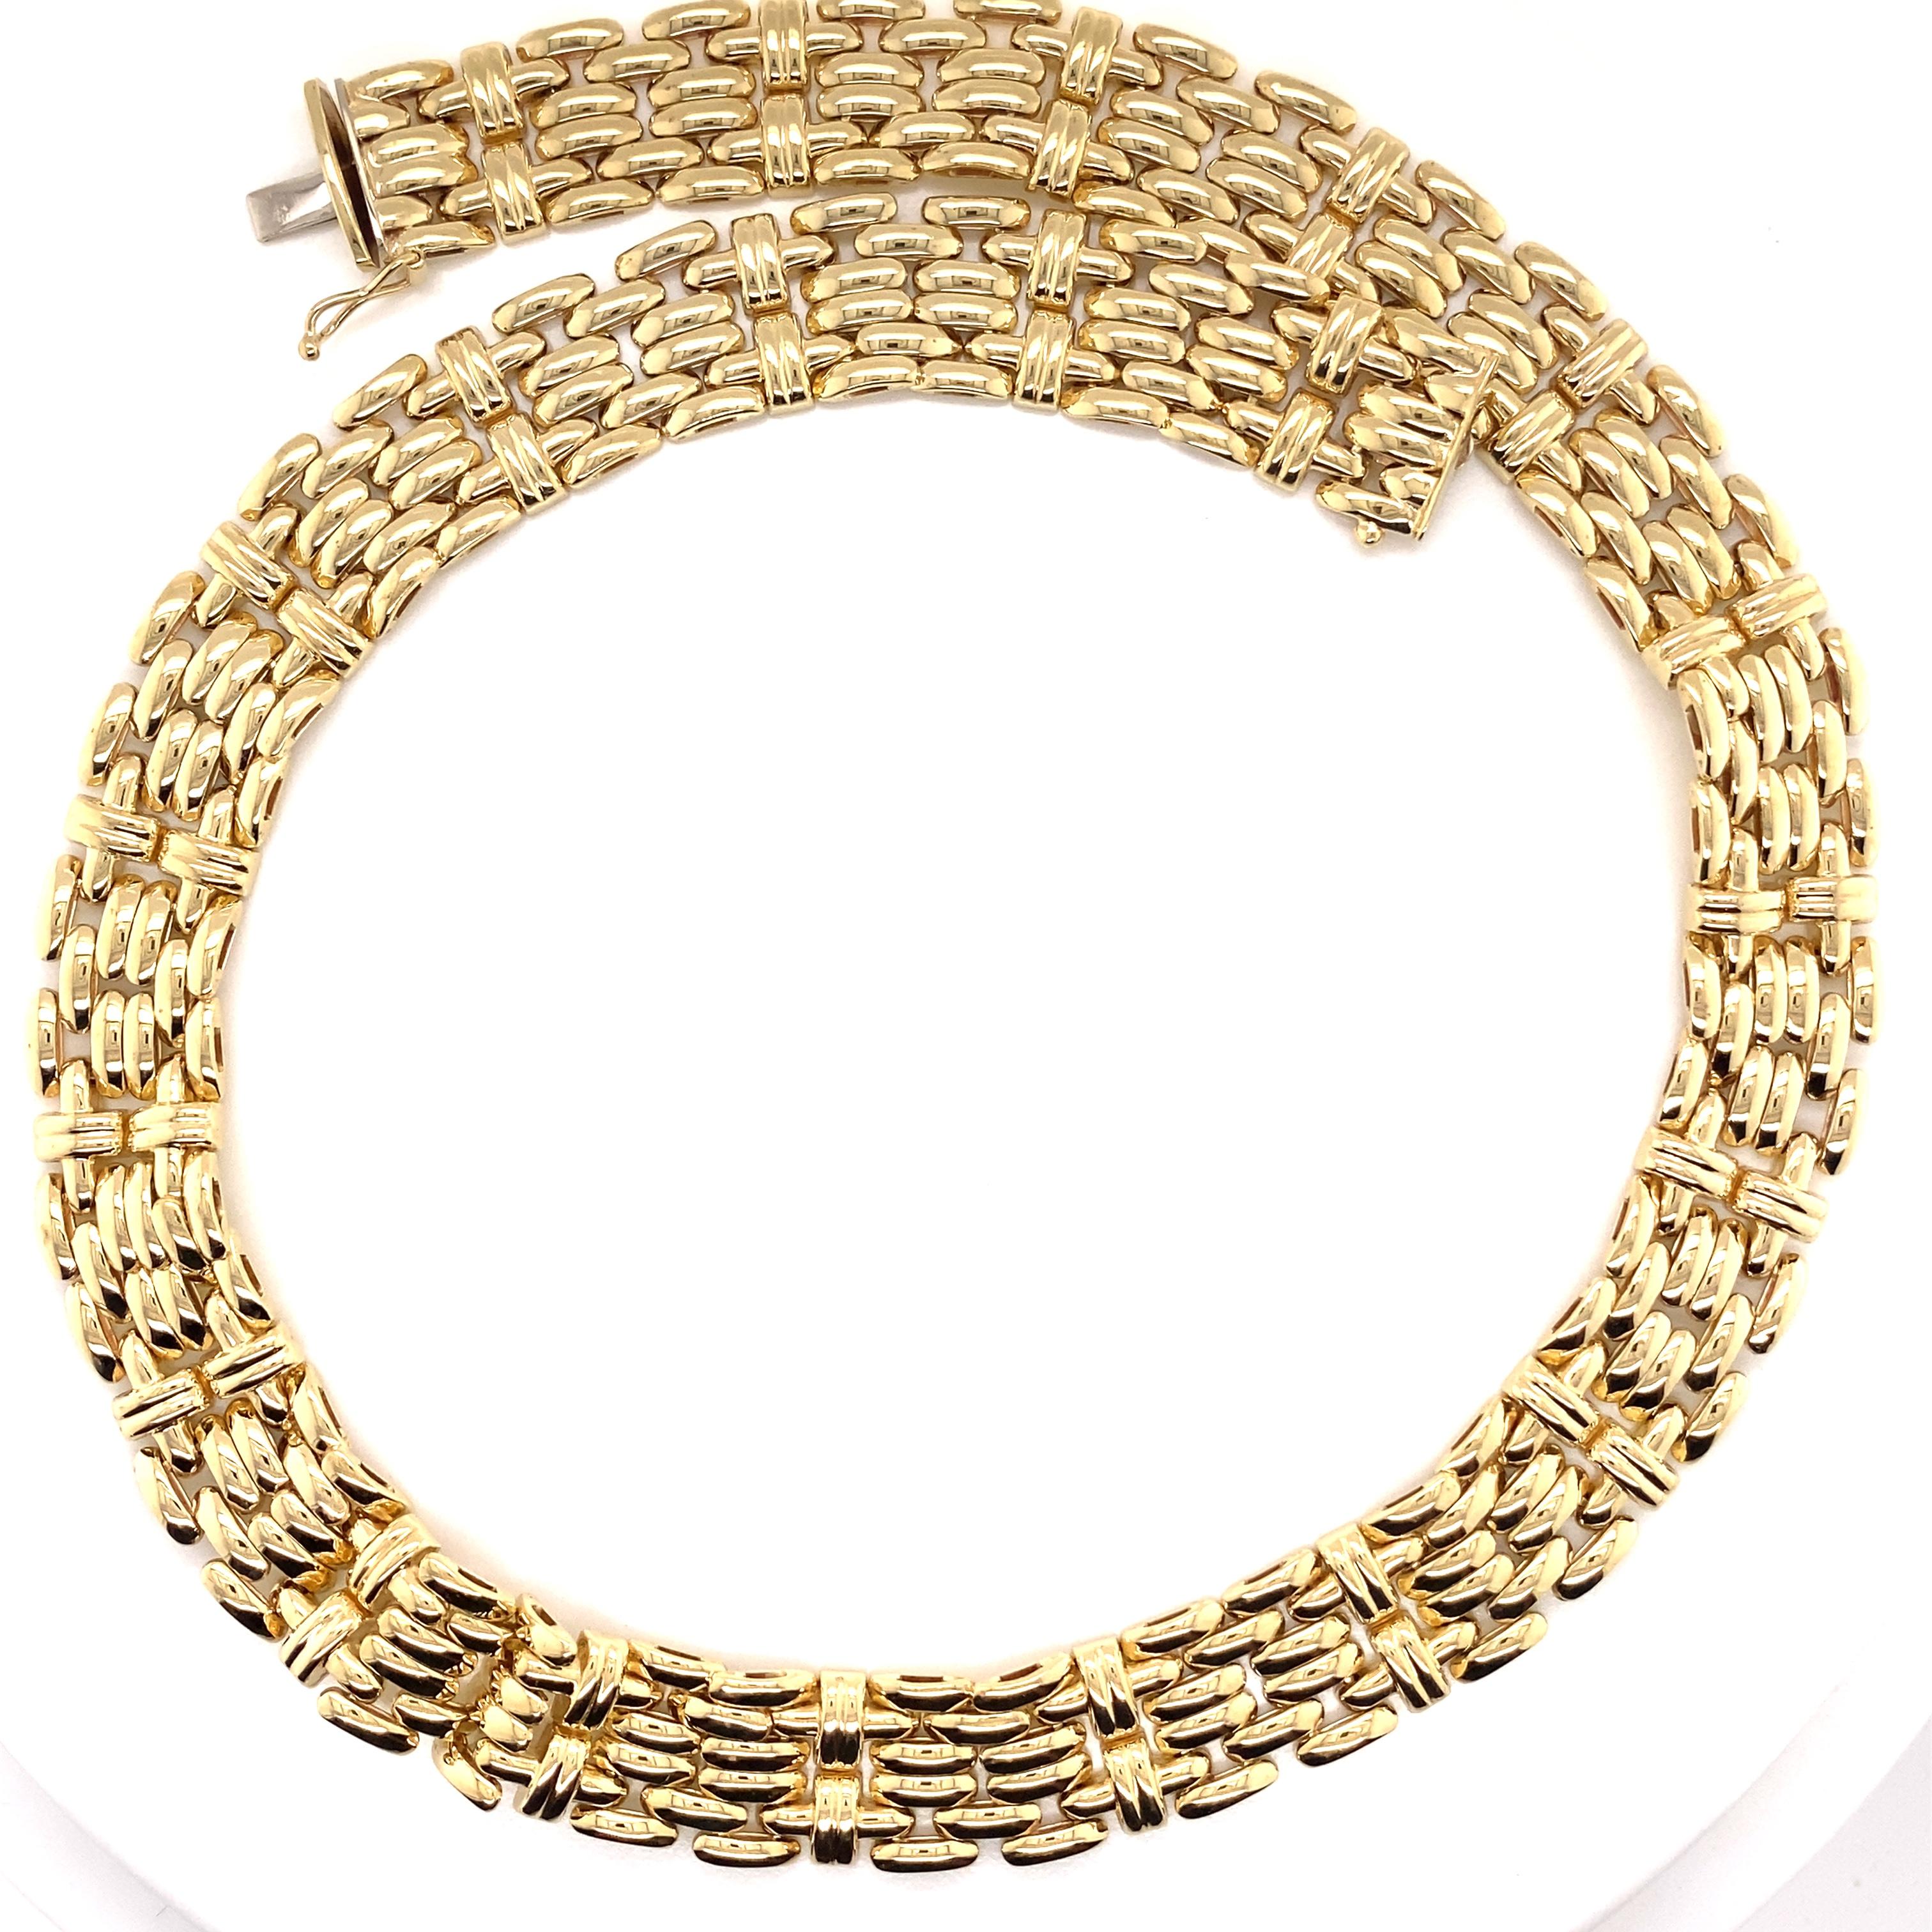 Vintage 1990's 14K Yellow Gold Italian Wide Panther Link Necklace - The Italian made necklace is 12.6mm wide and 16 inches long and features a hidden plunger clasp with a figure 8 safety. The necklace weighs 49.4 grams.